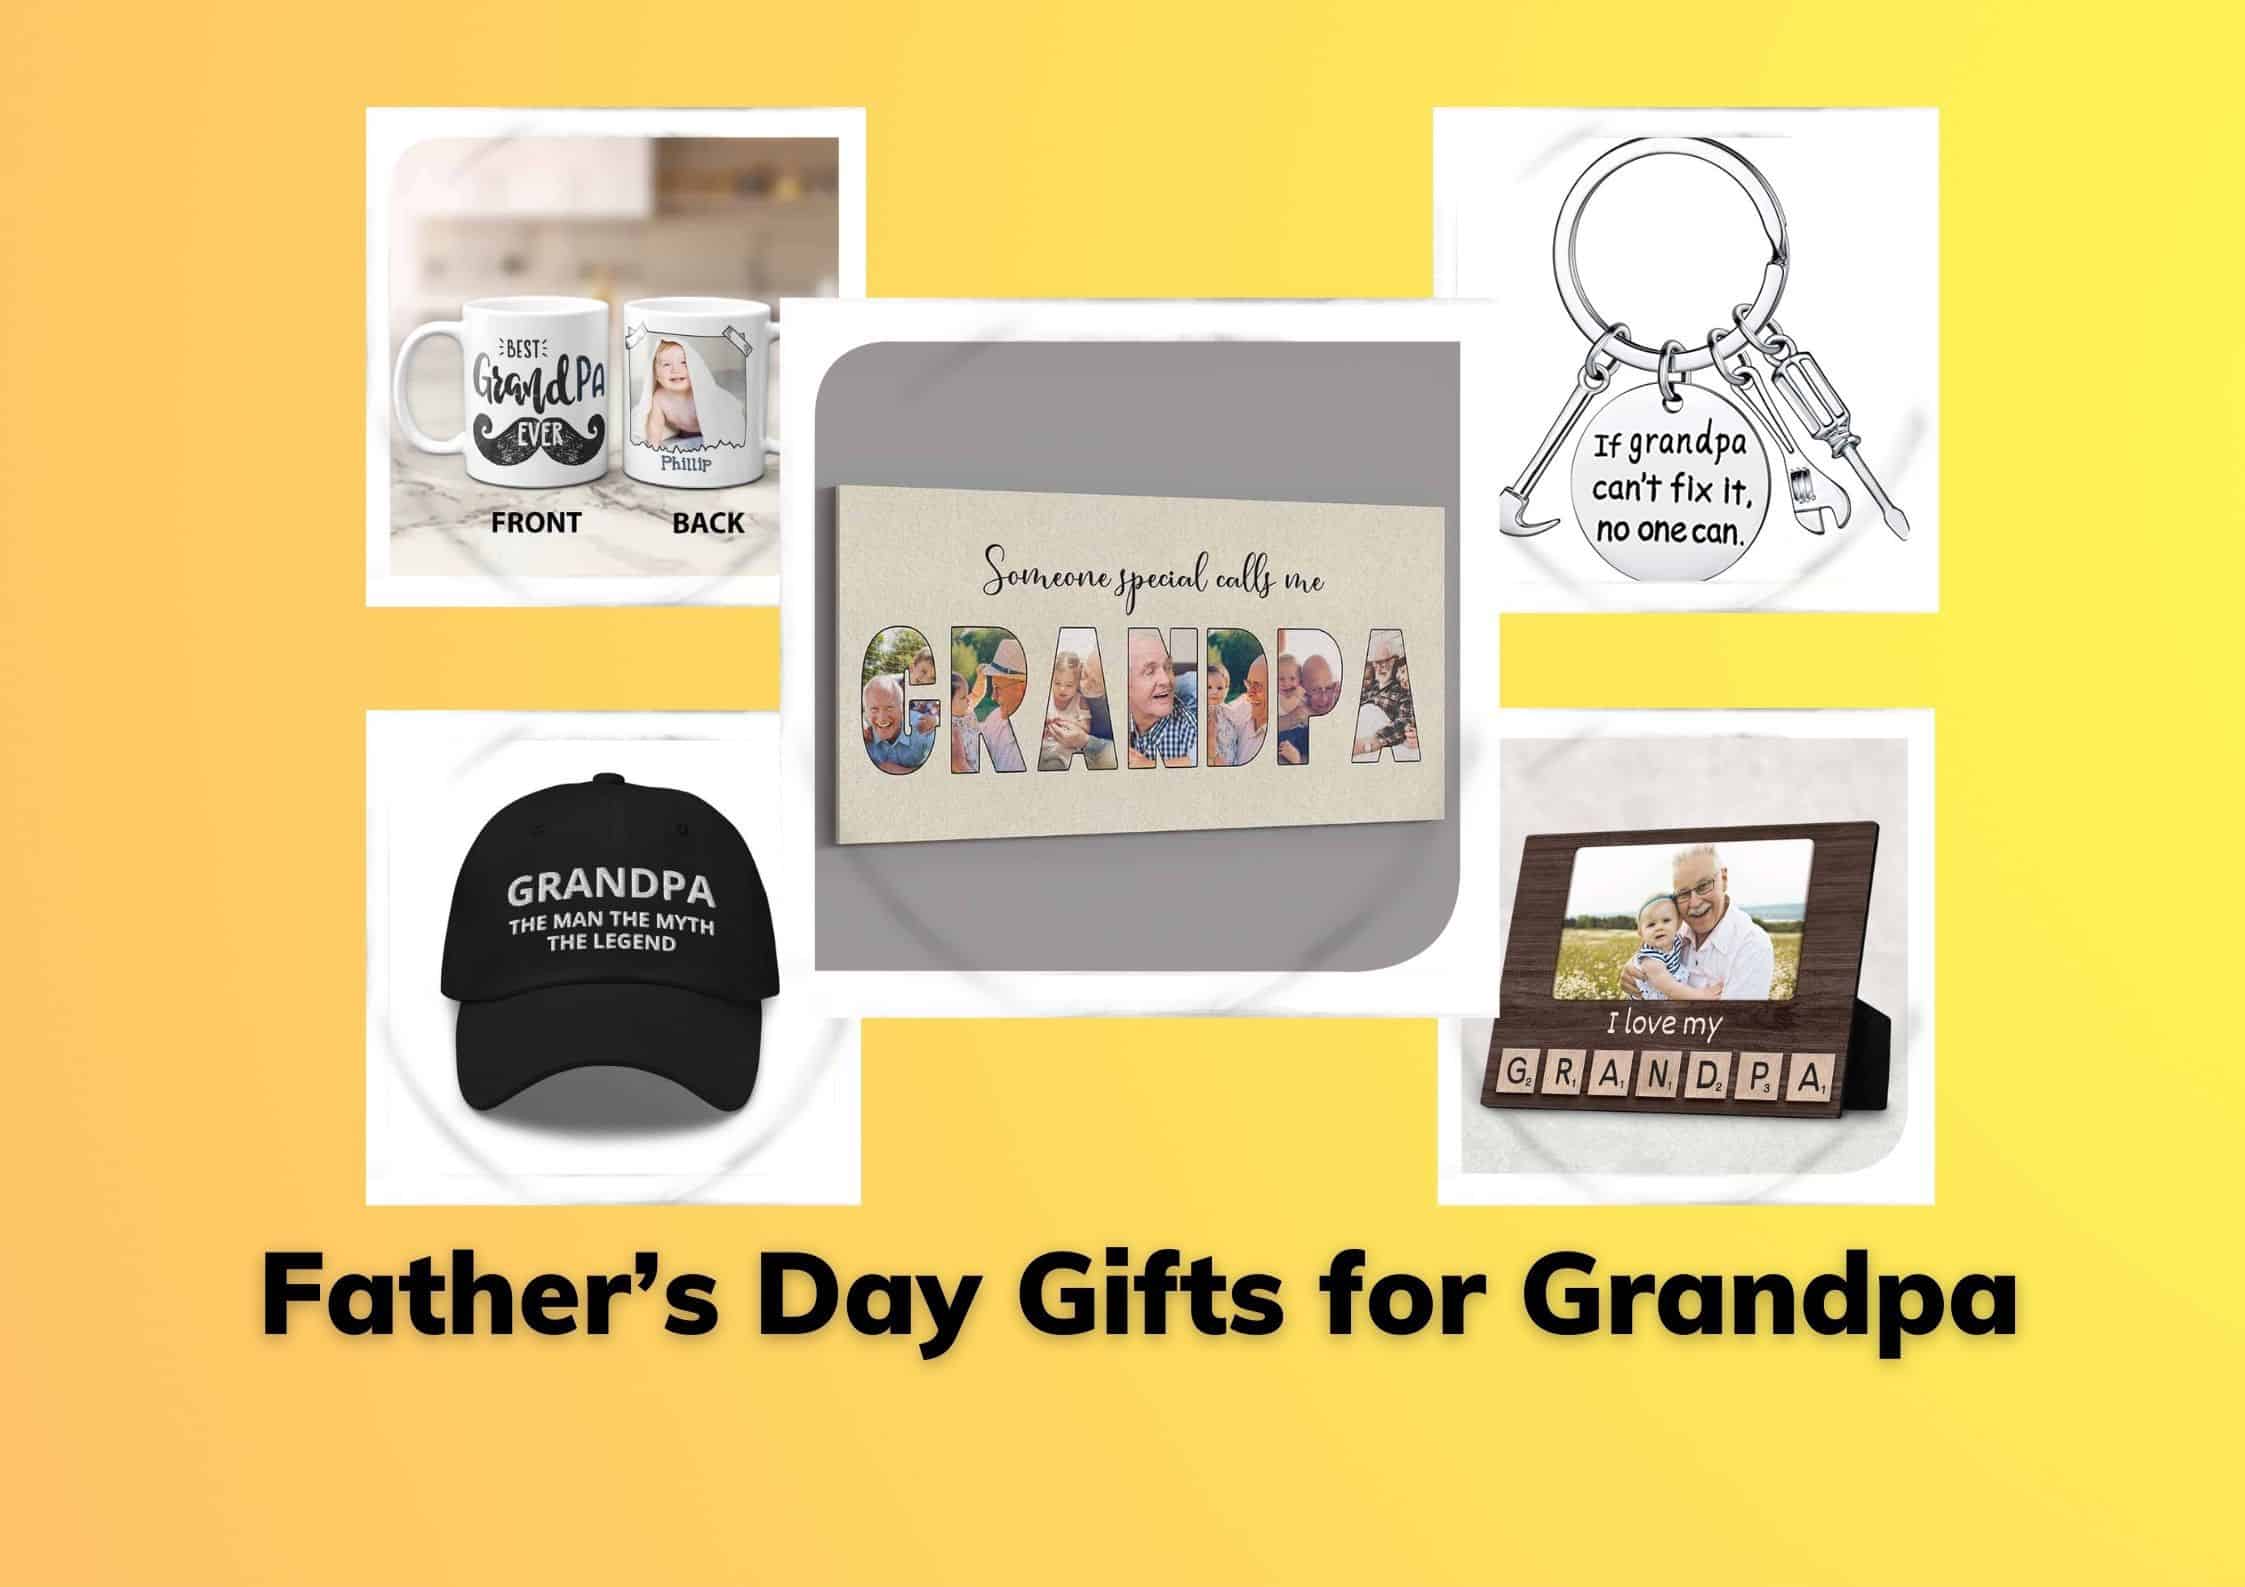 Birthday Grand dad Christmas gift A Round Tuit.. Fun Gift Fathers Day 